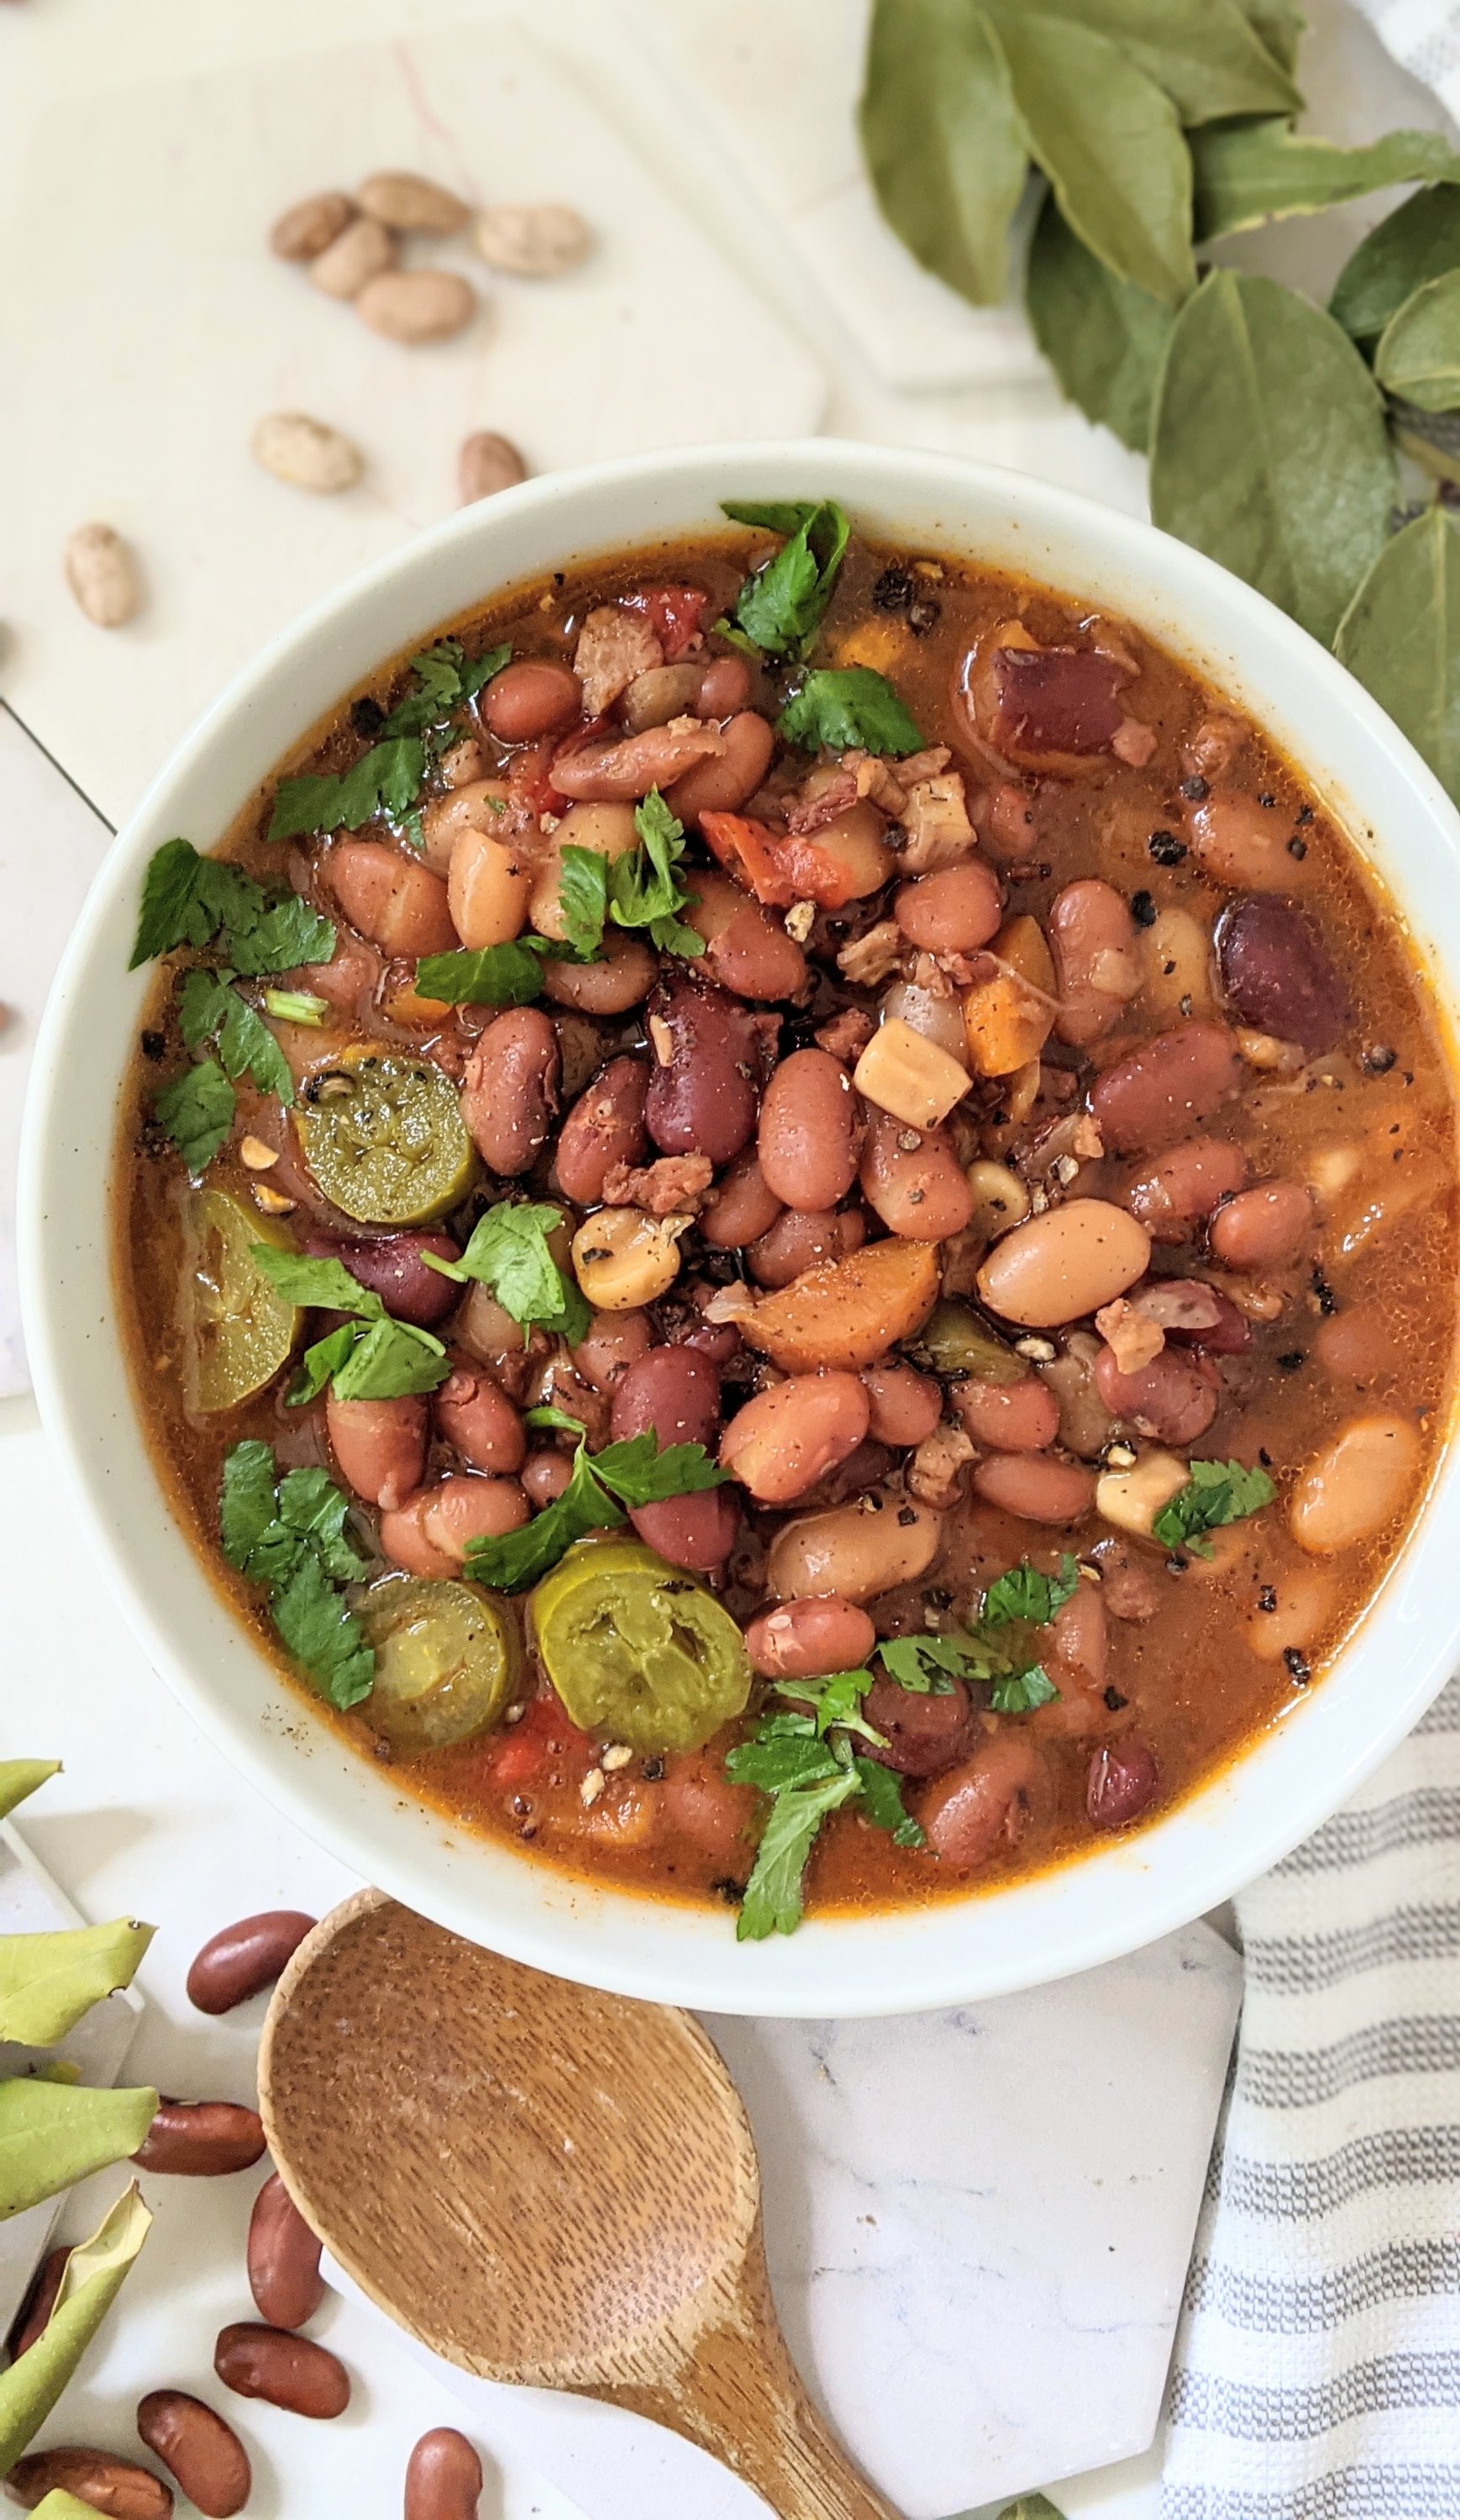 vegetarian cowboy bean stew recipes with beans for lunch or dinner smoky pinto bean stew with kidney beans and white beans meatless cowboy recipes for barbecue bean soup plant based